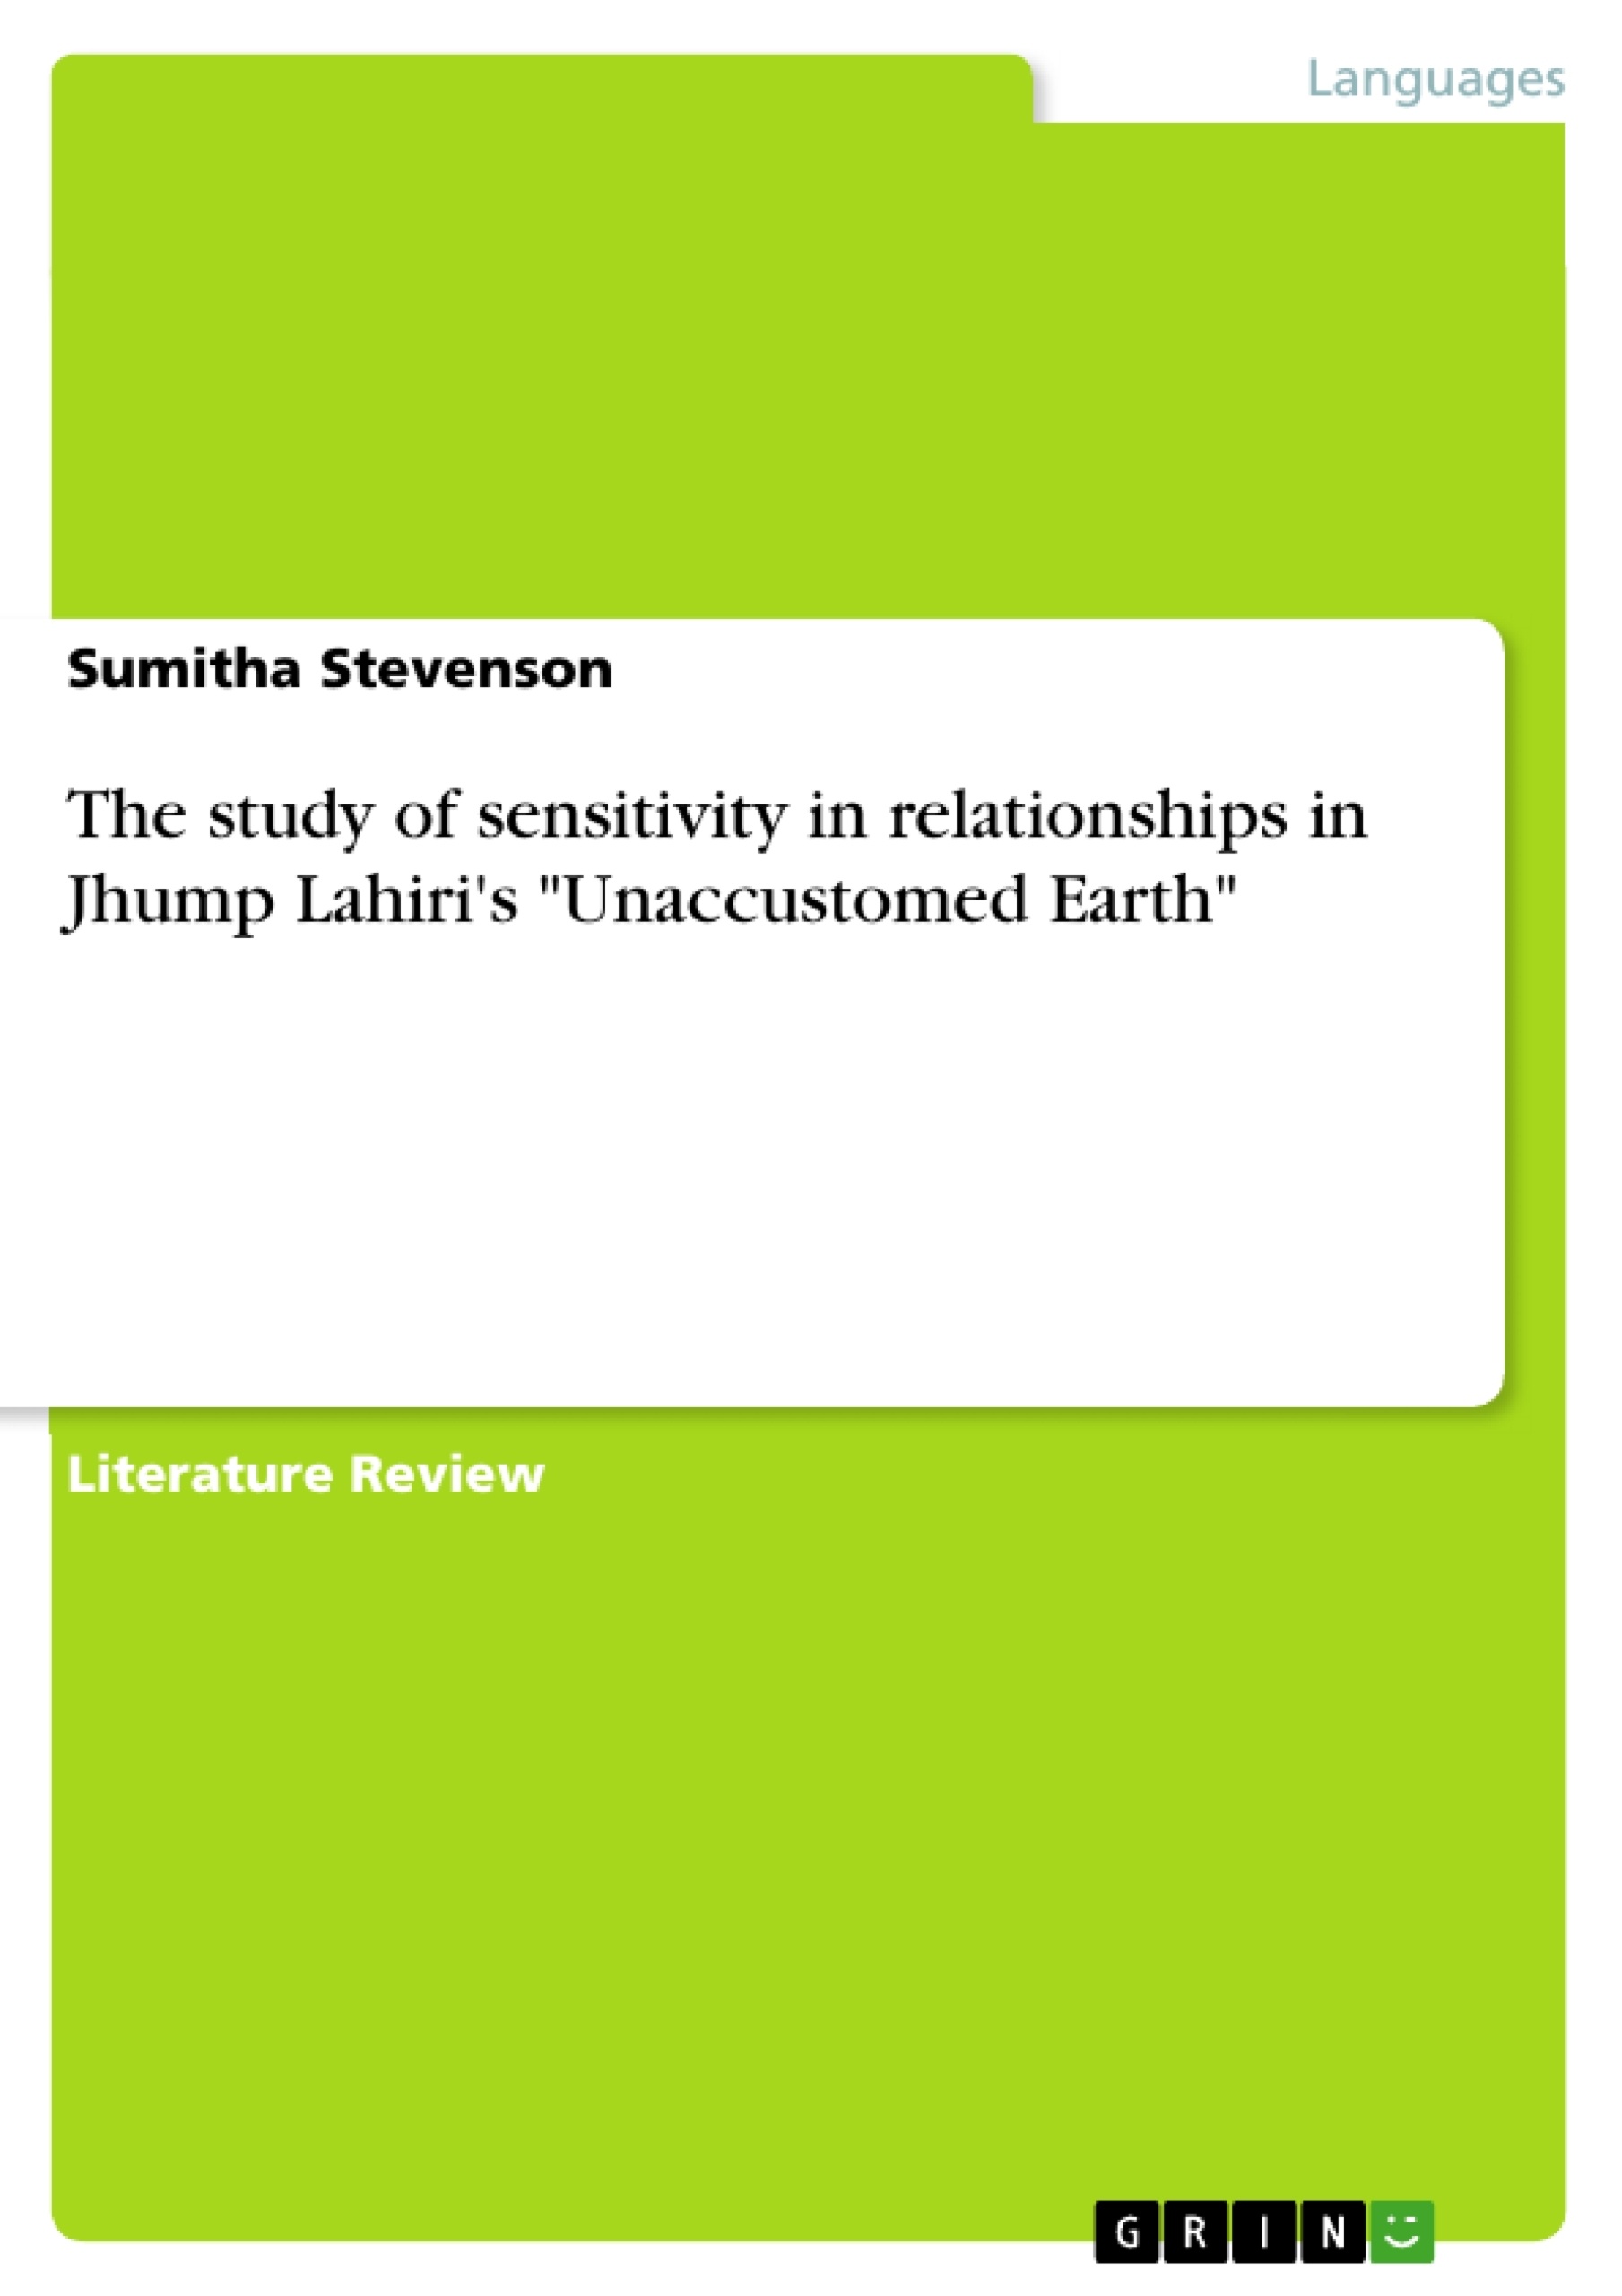 Título: The study of sensitivity in relationships in Jhump Lahiri's "Unaccustomed Earth"